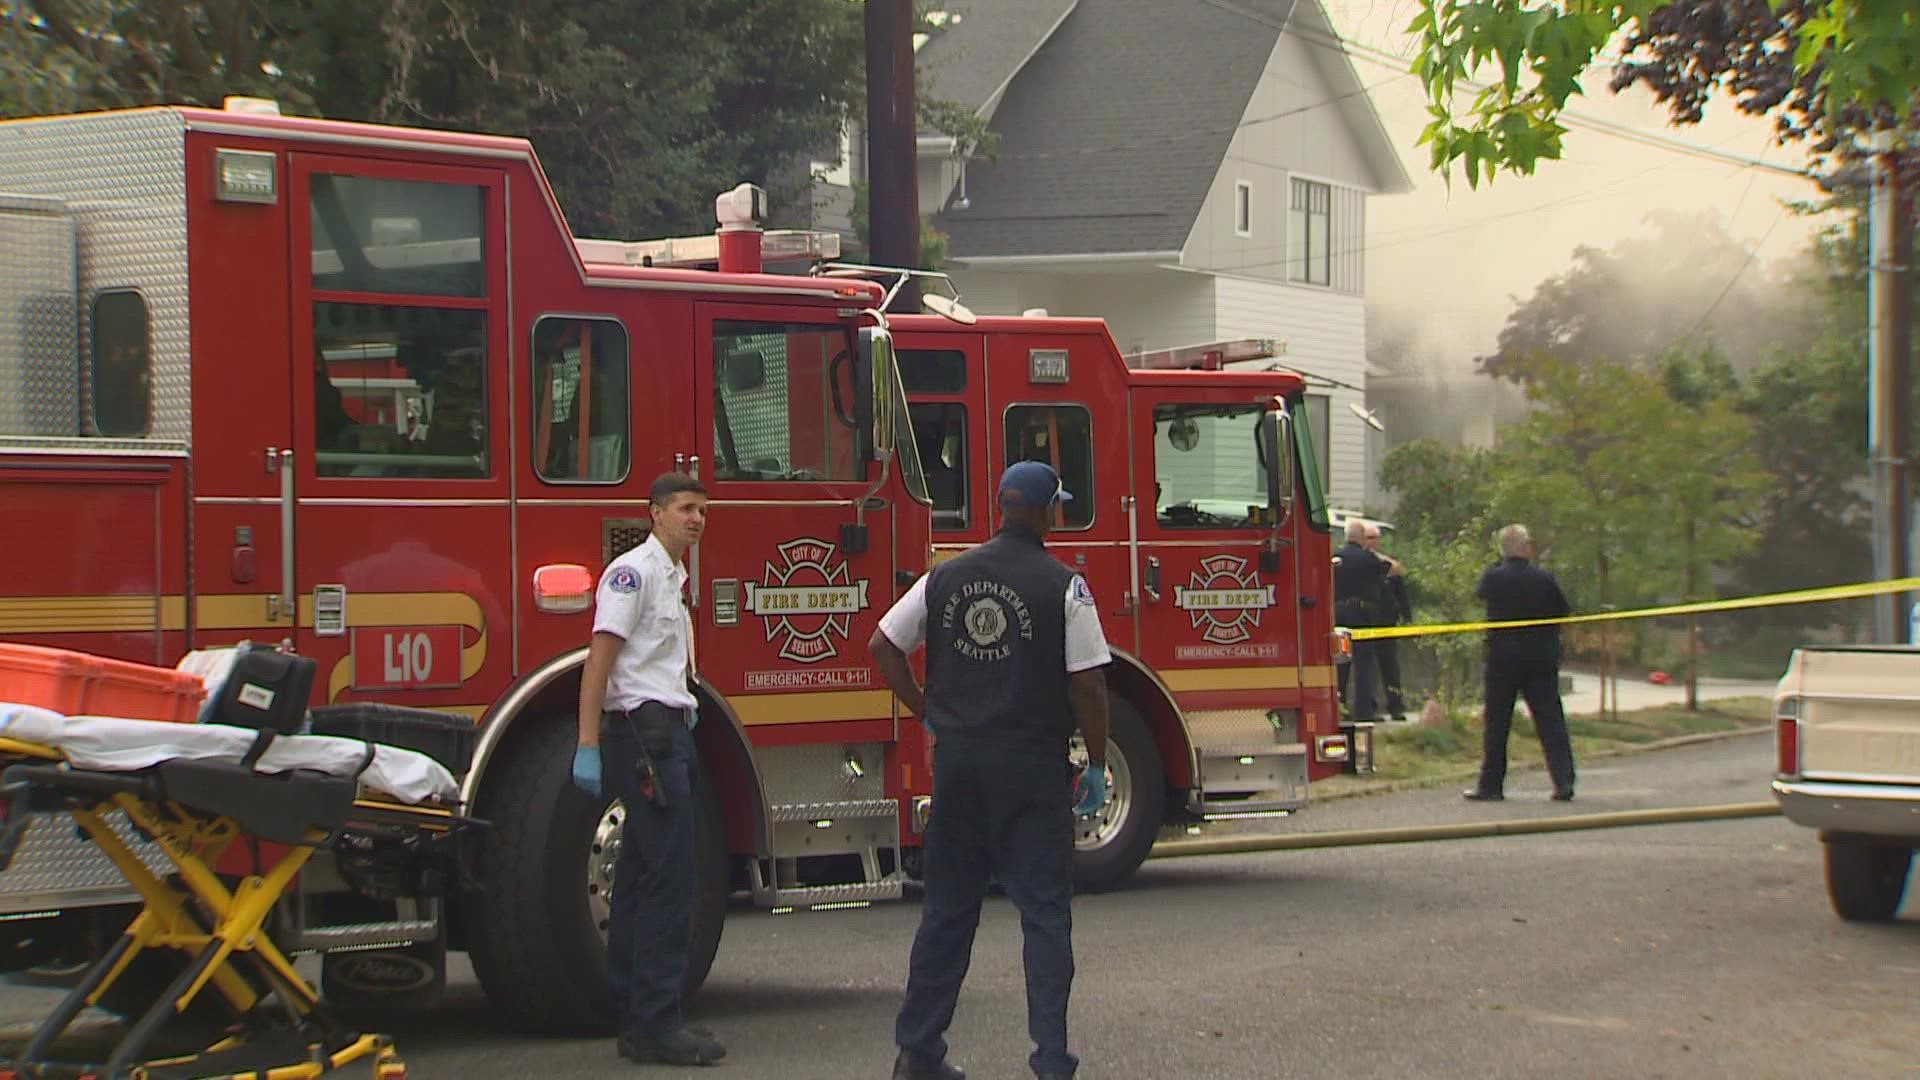 2 people were found dead in a Montlake neighborhood house fire after police say a suspect tried to stab officers.